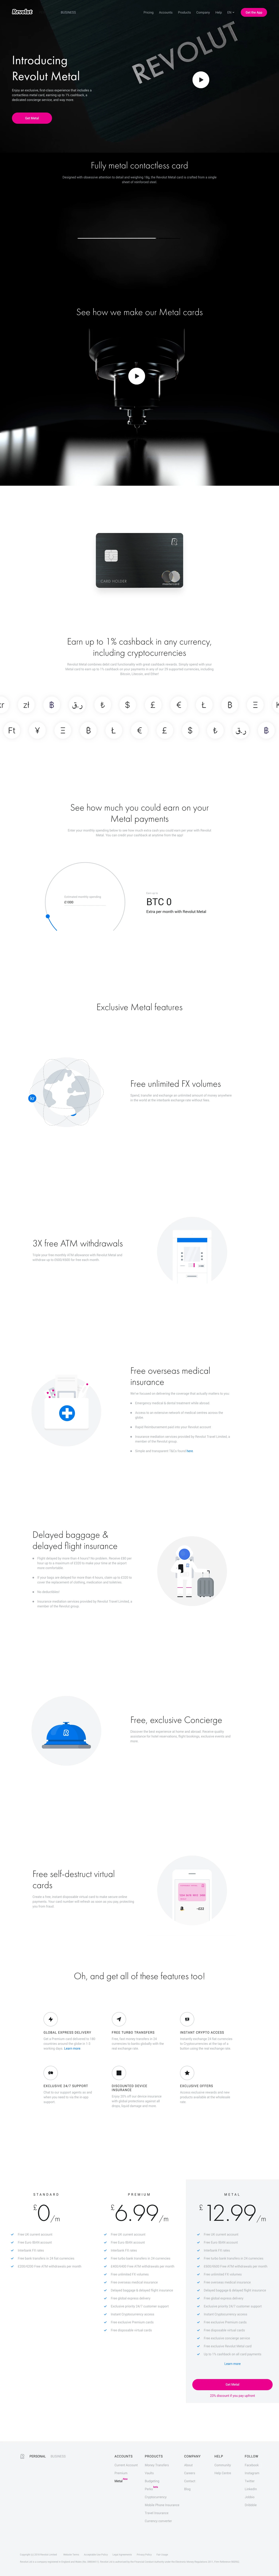 Revolut Metal Landing Page Example: Enjoy an exclusive, first-class experience that includes a contactless metal card, earning up to 1% cashback, a dedicated concierge service, and way more.